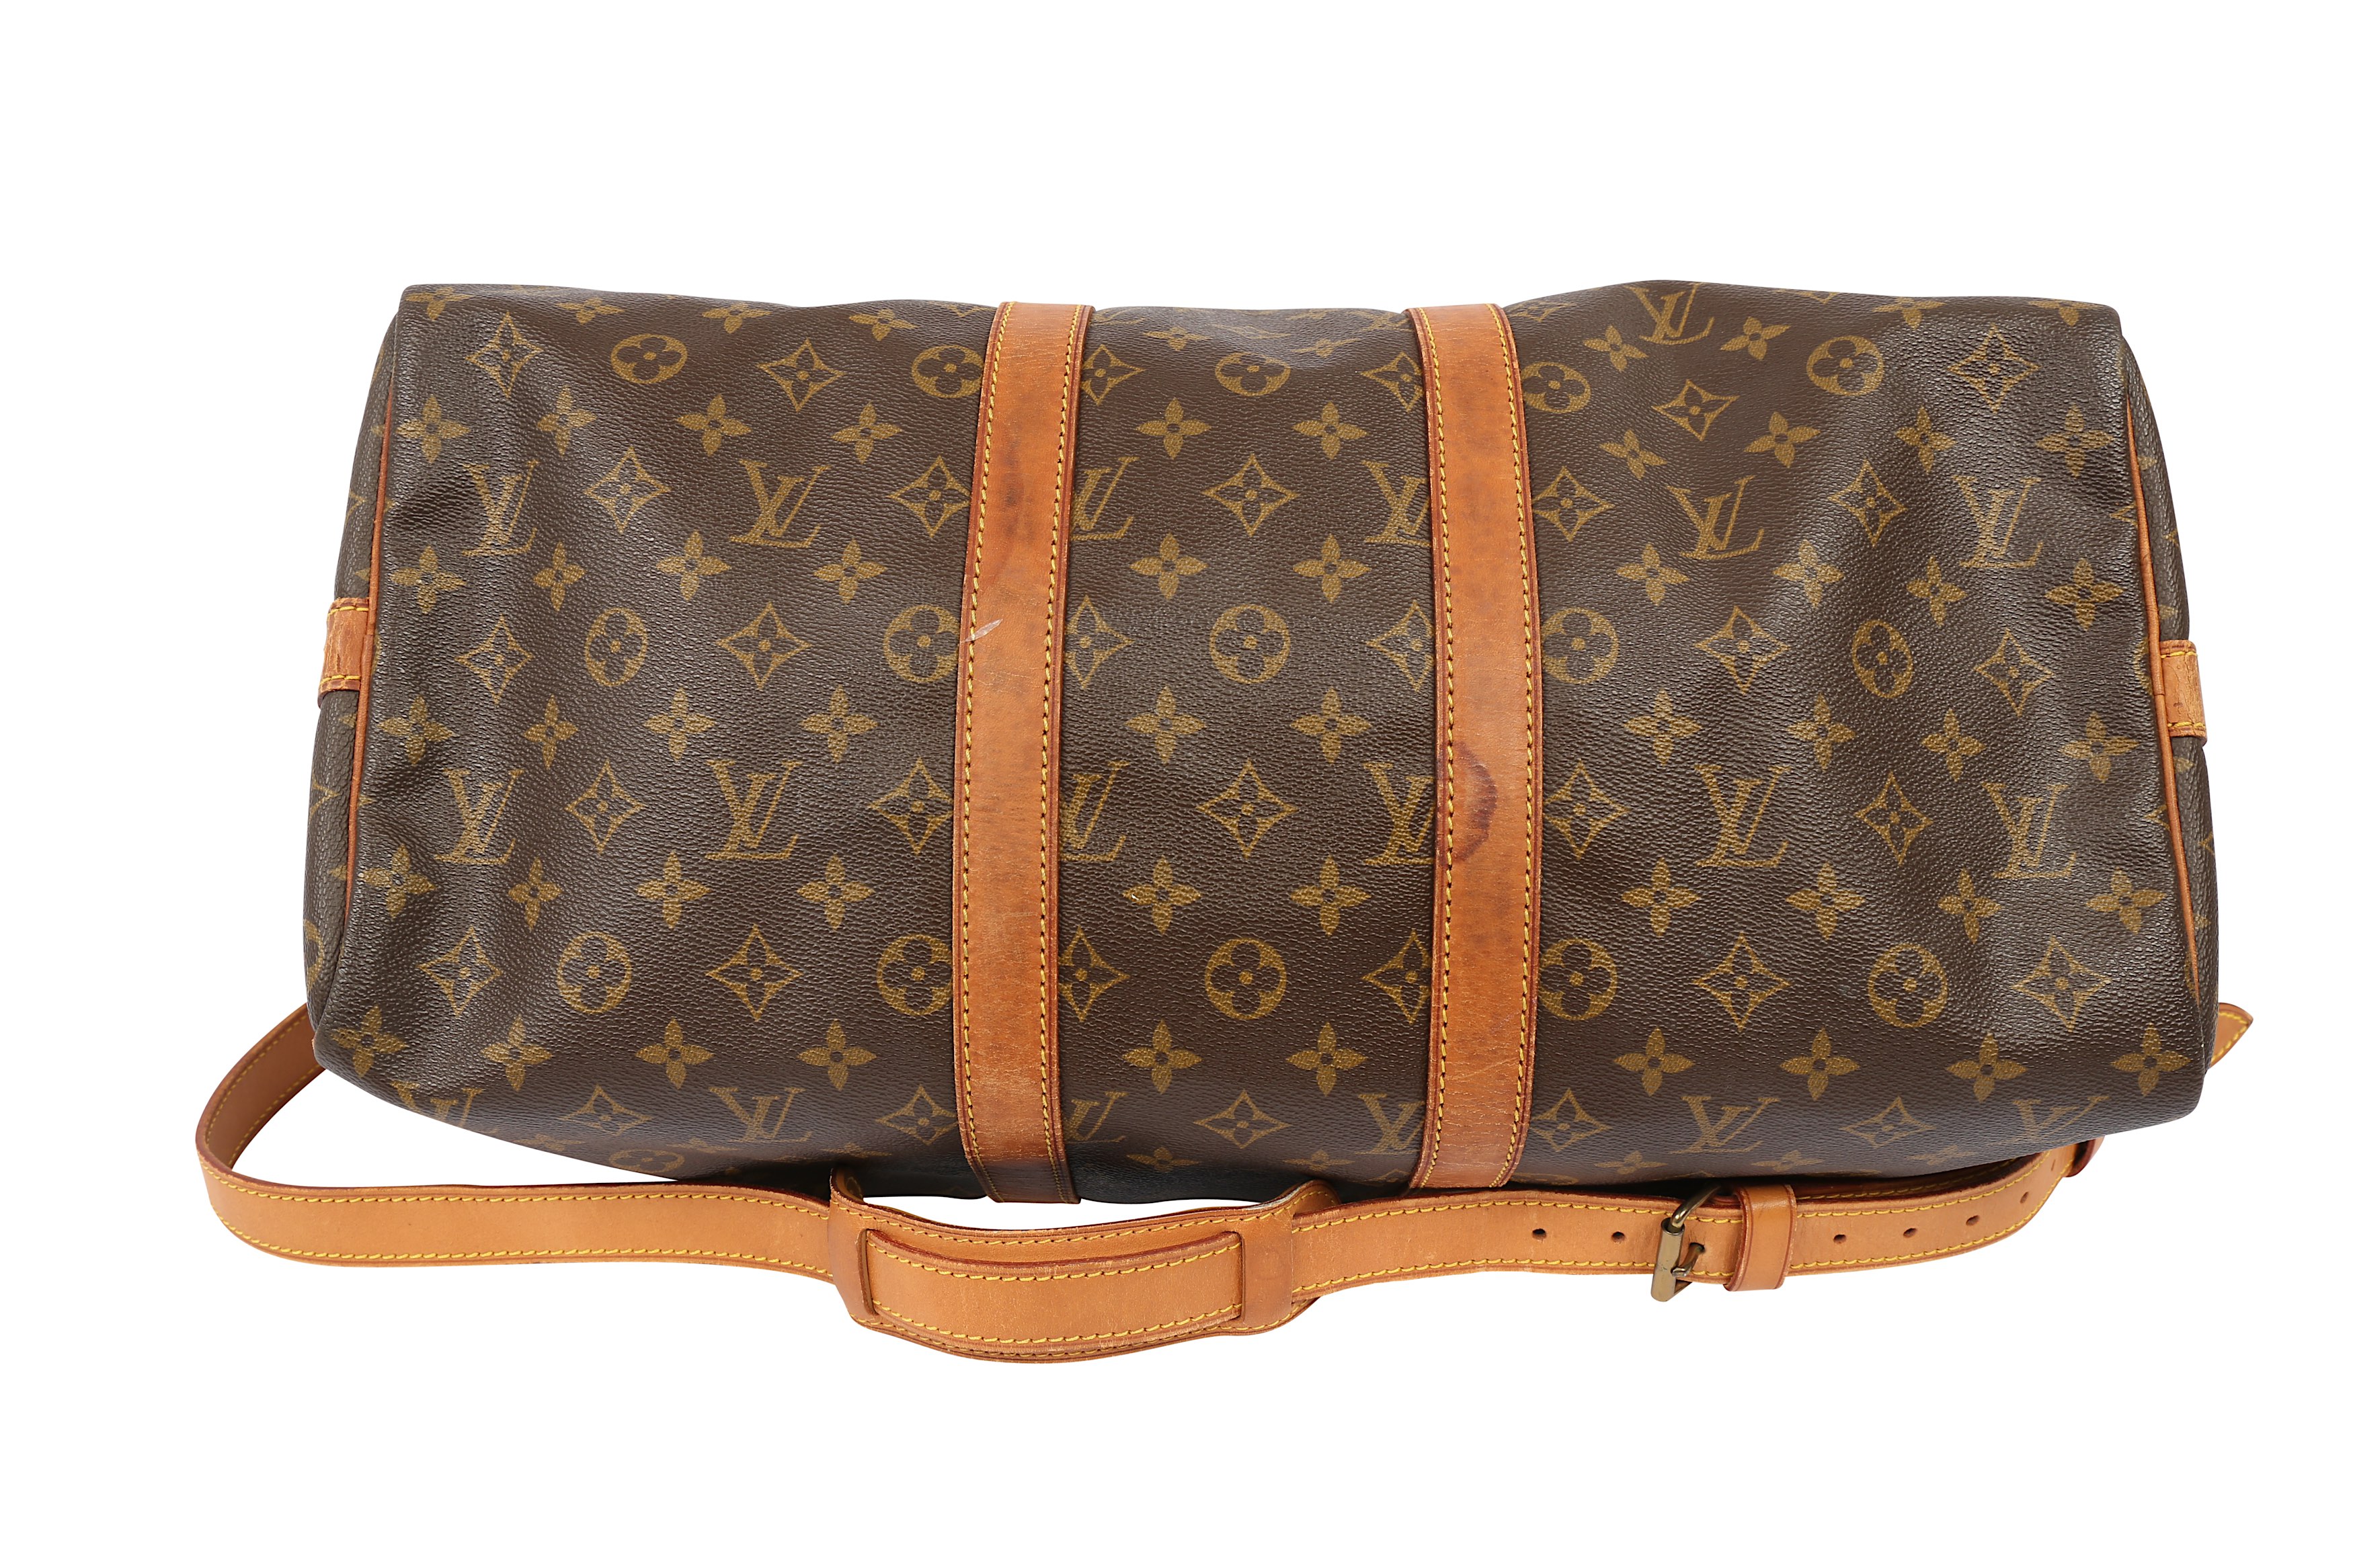 Louis Vuitton Monogram Keepall Bandouliere 45 - Image 5 of 7